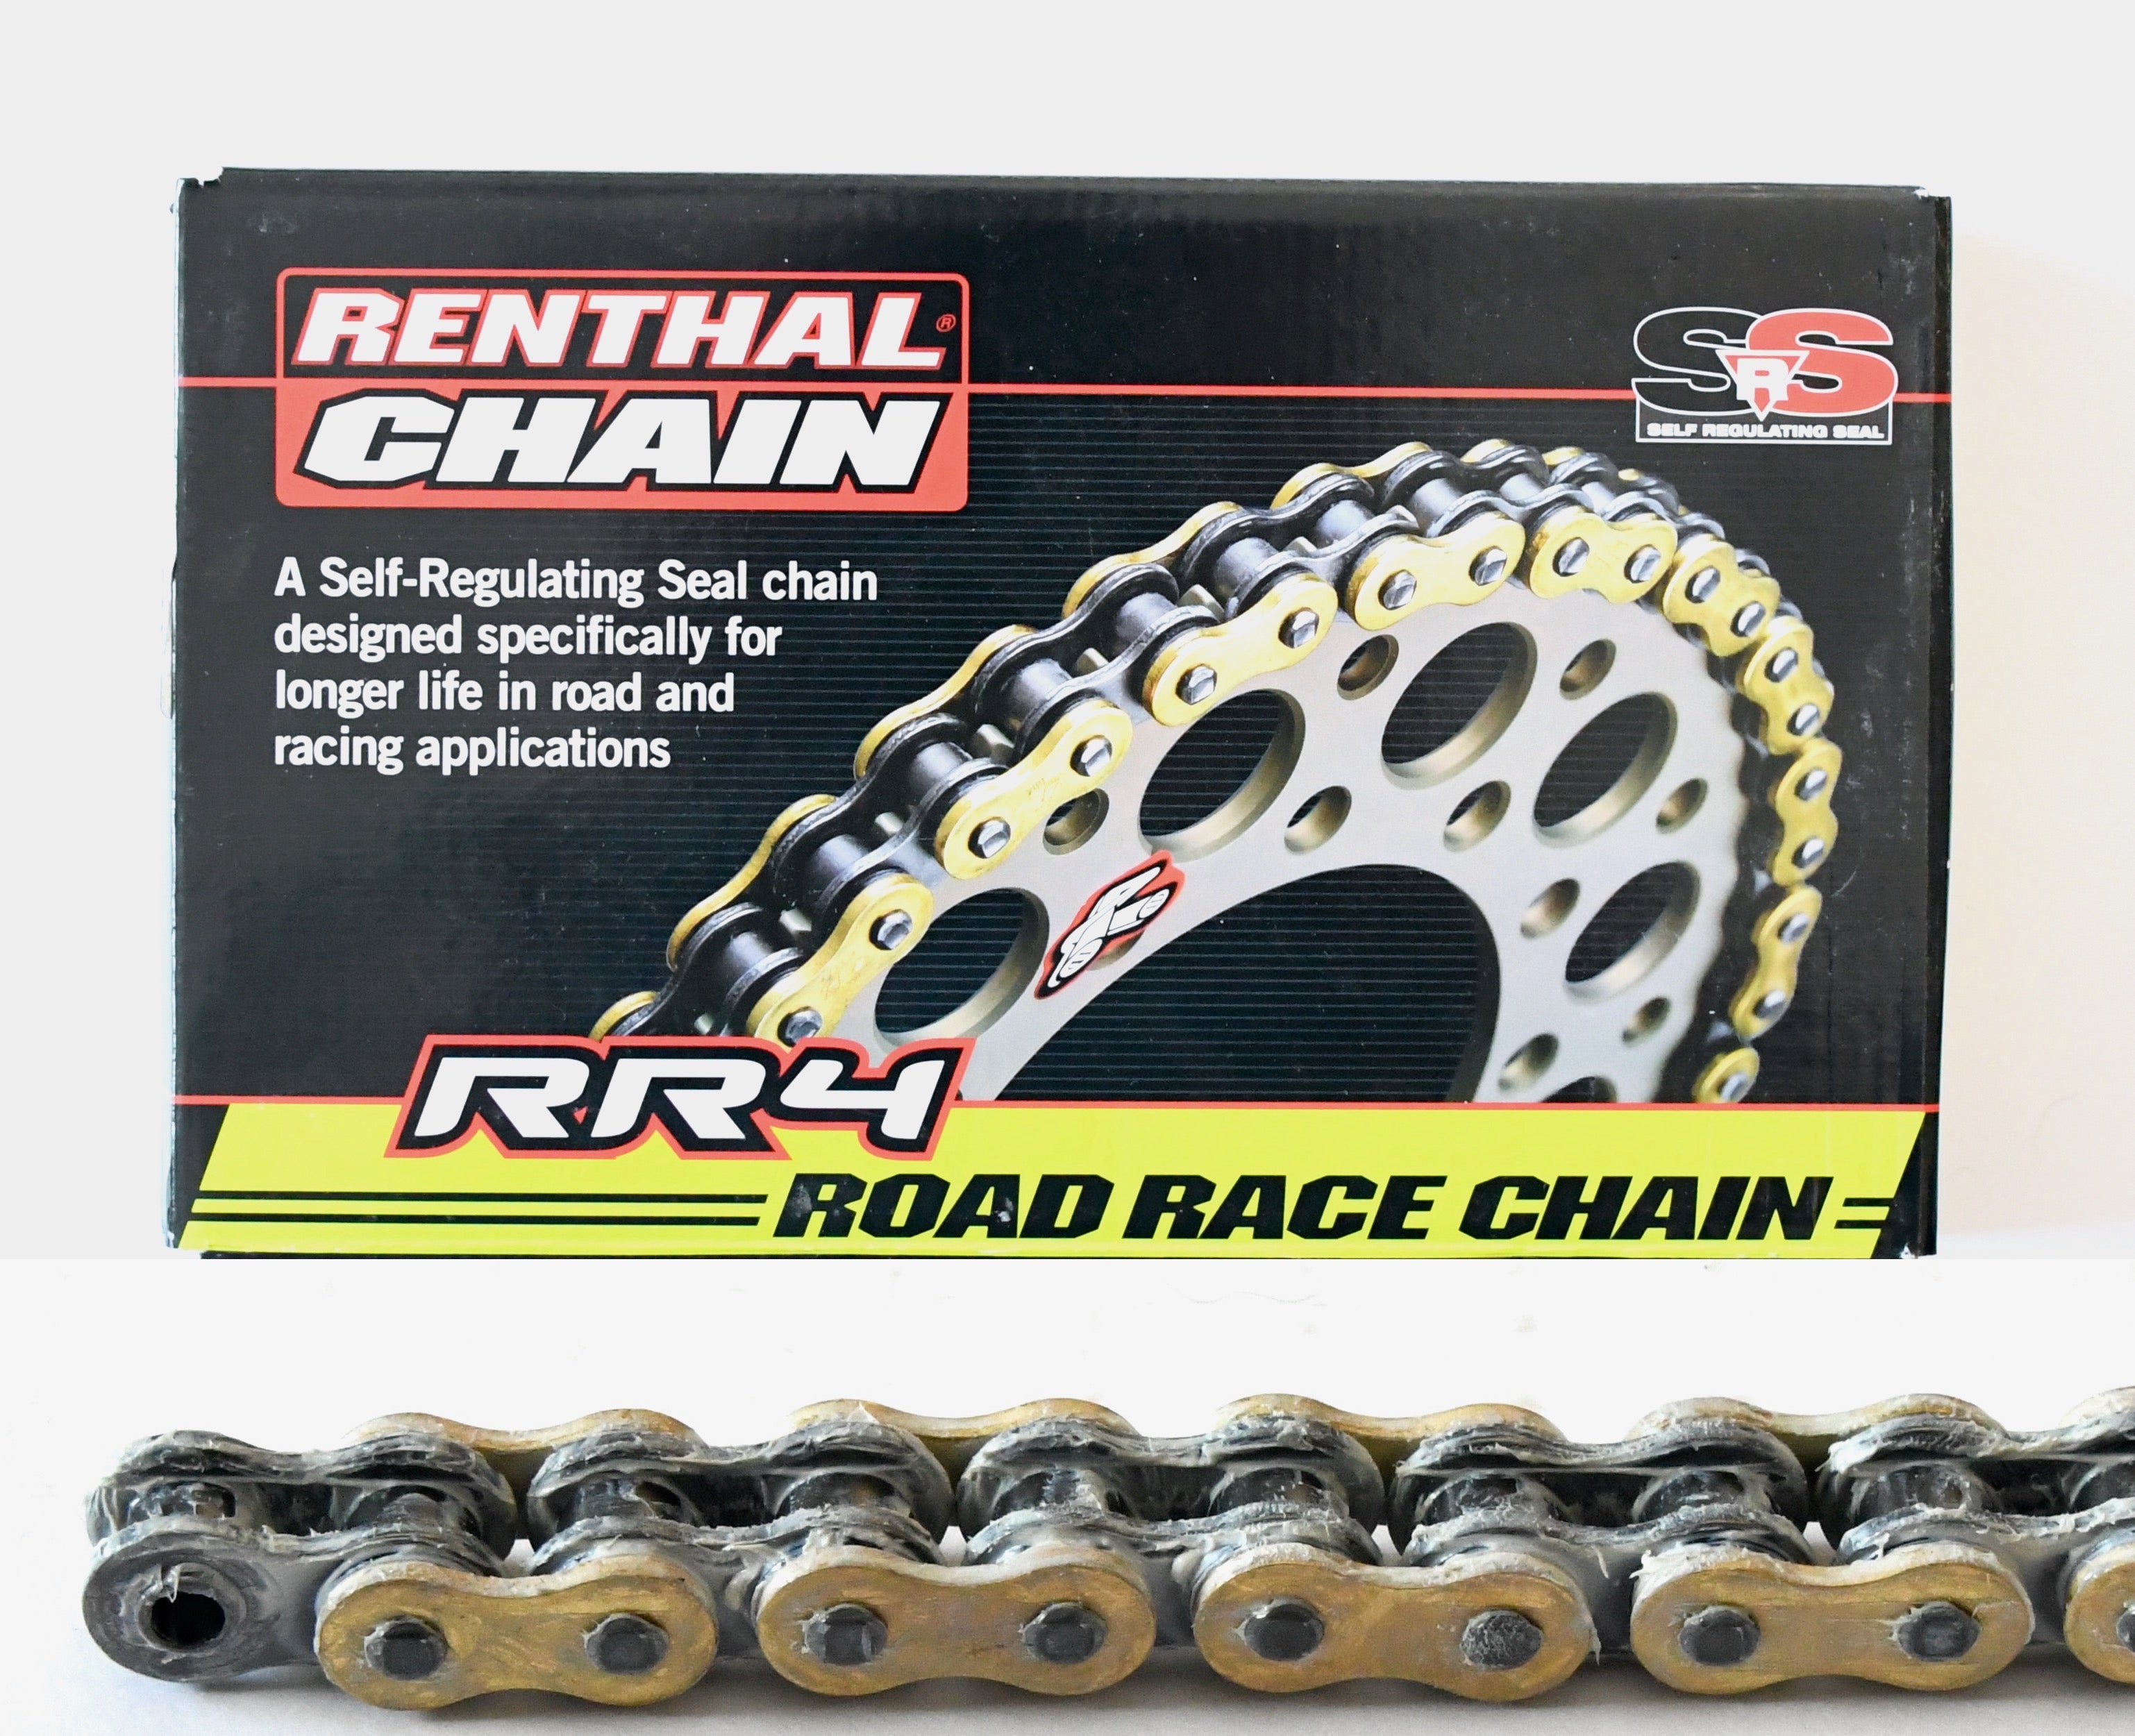 Renthal 520 RR4 SRS Ring Racing chain - 120 Links - Gold